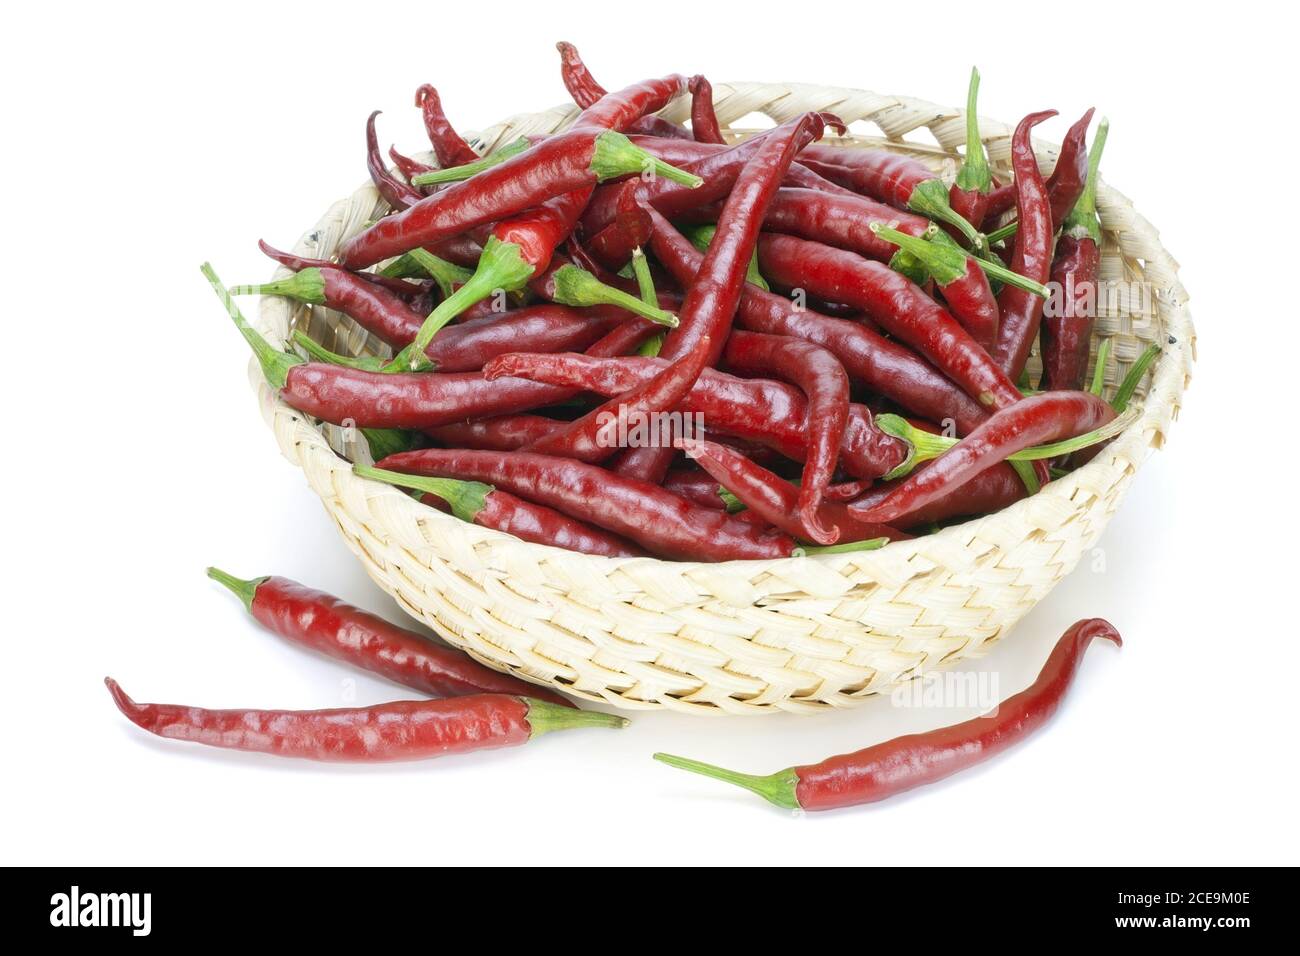 Red hot chilli peppers in basket Stock Photo